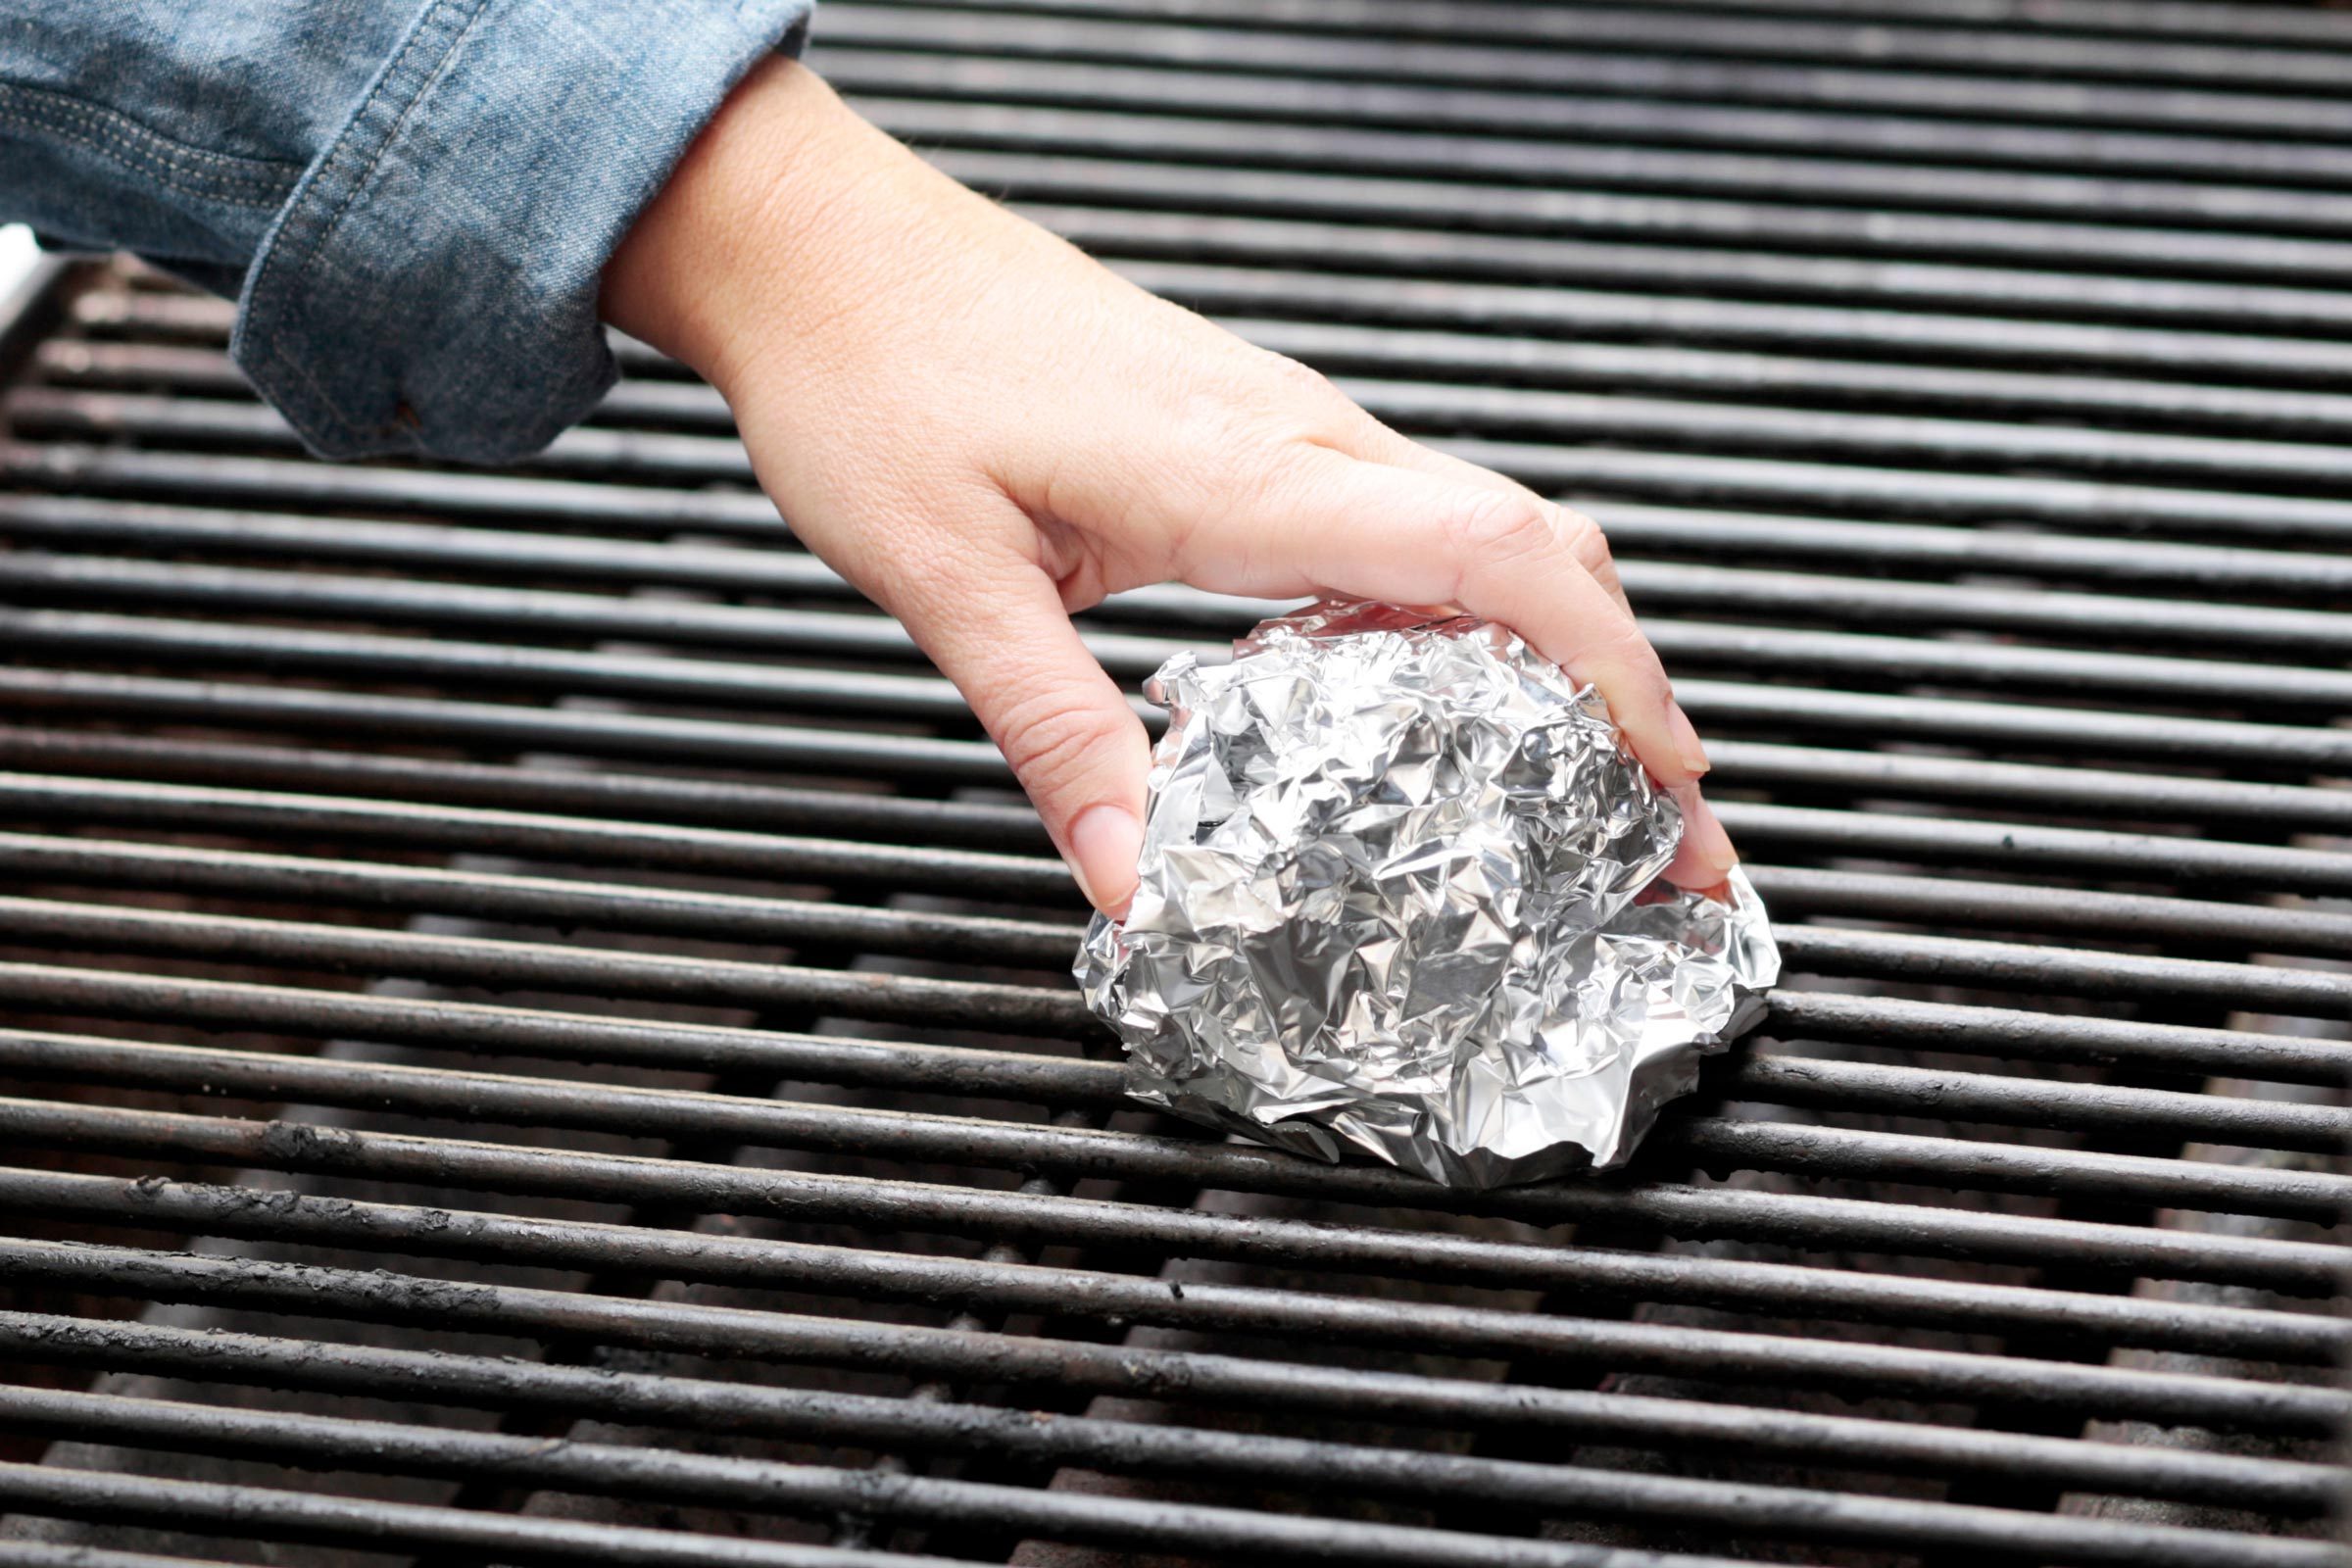 10 Clever Ways To Use Aluminum Foil